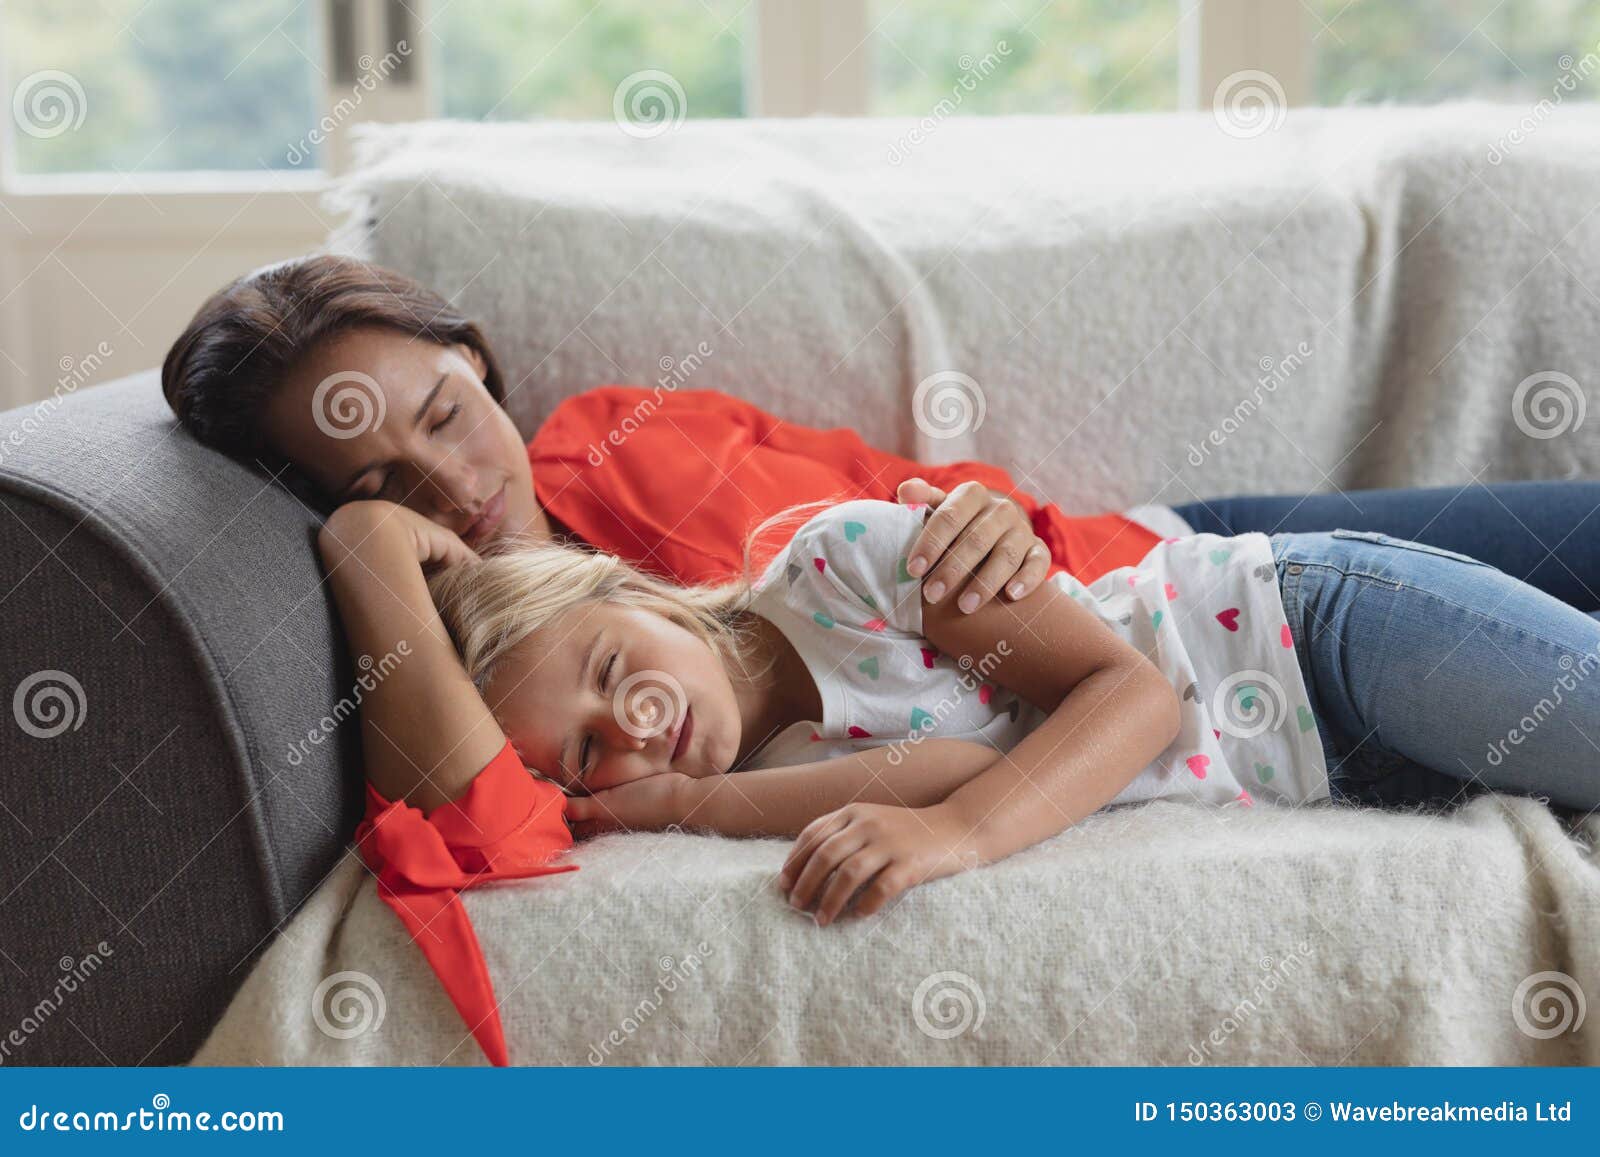 Mother And Daughter Sleeping Together On A Sofa In Living Room Stock 